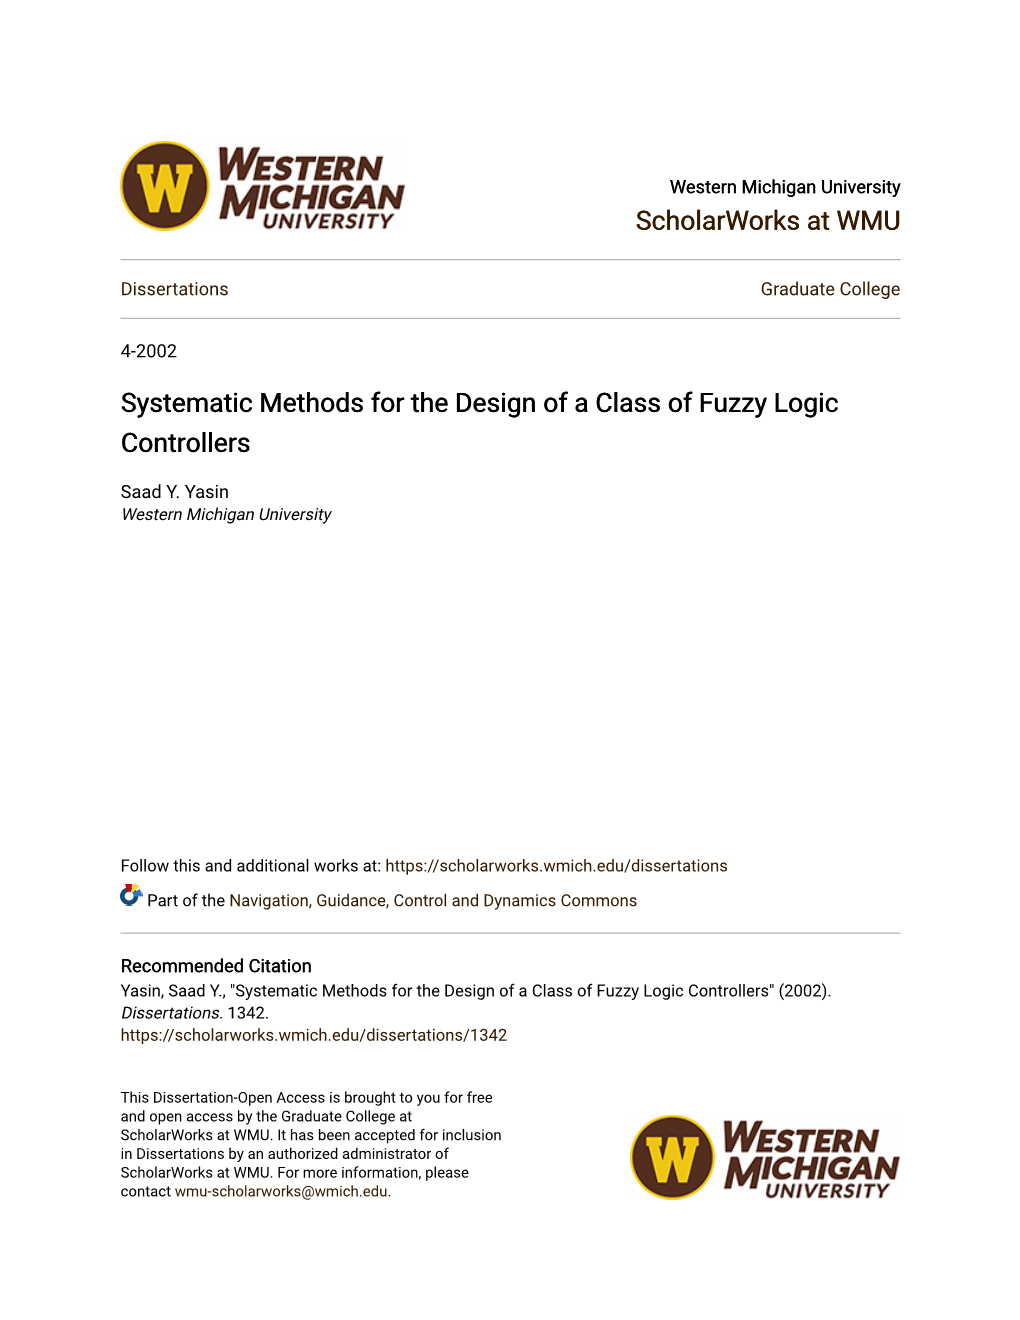 Systematic Methods for the Design of a Class of Fuzzy Logic Controllers